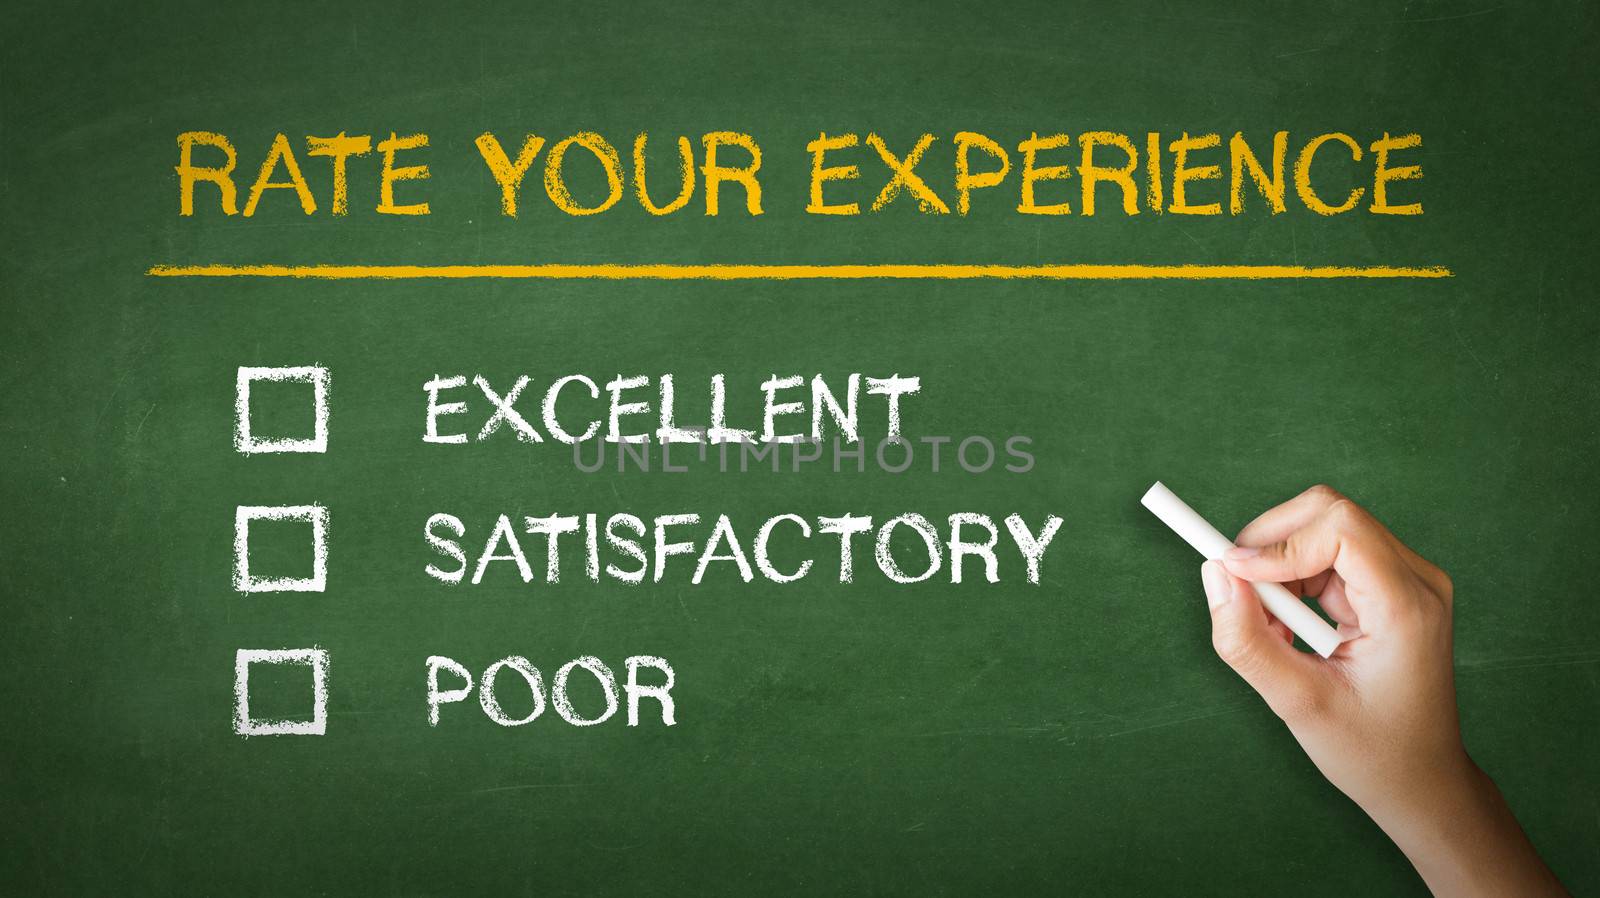 Rate Your Experience by kbuntu